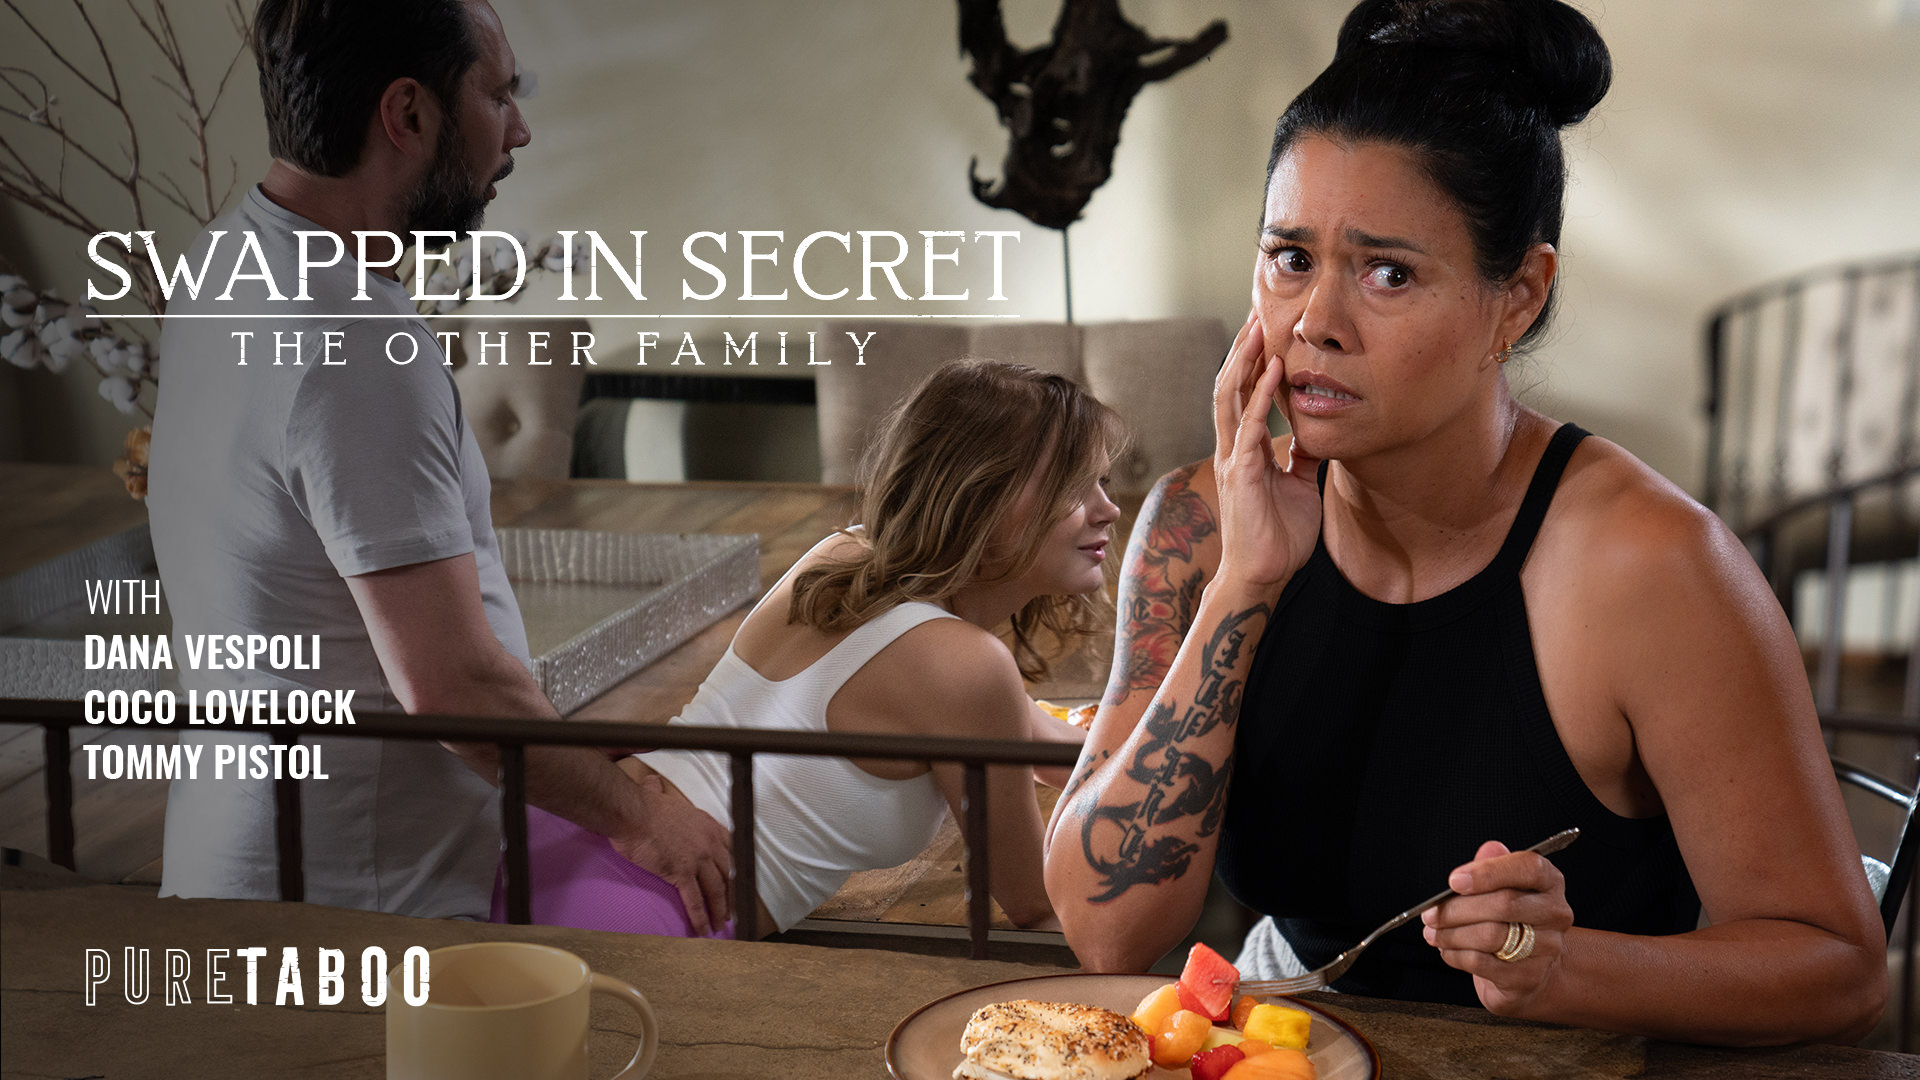 Swapped In Secret: The Other Family – Tommy Pistol, Coco Lovelock, Dana Vespoli – Pure Taboo